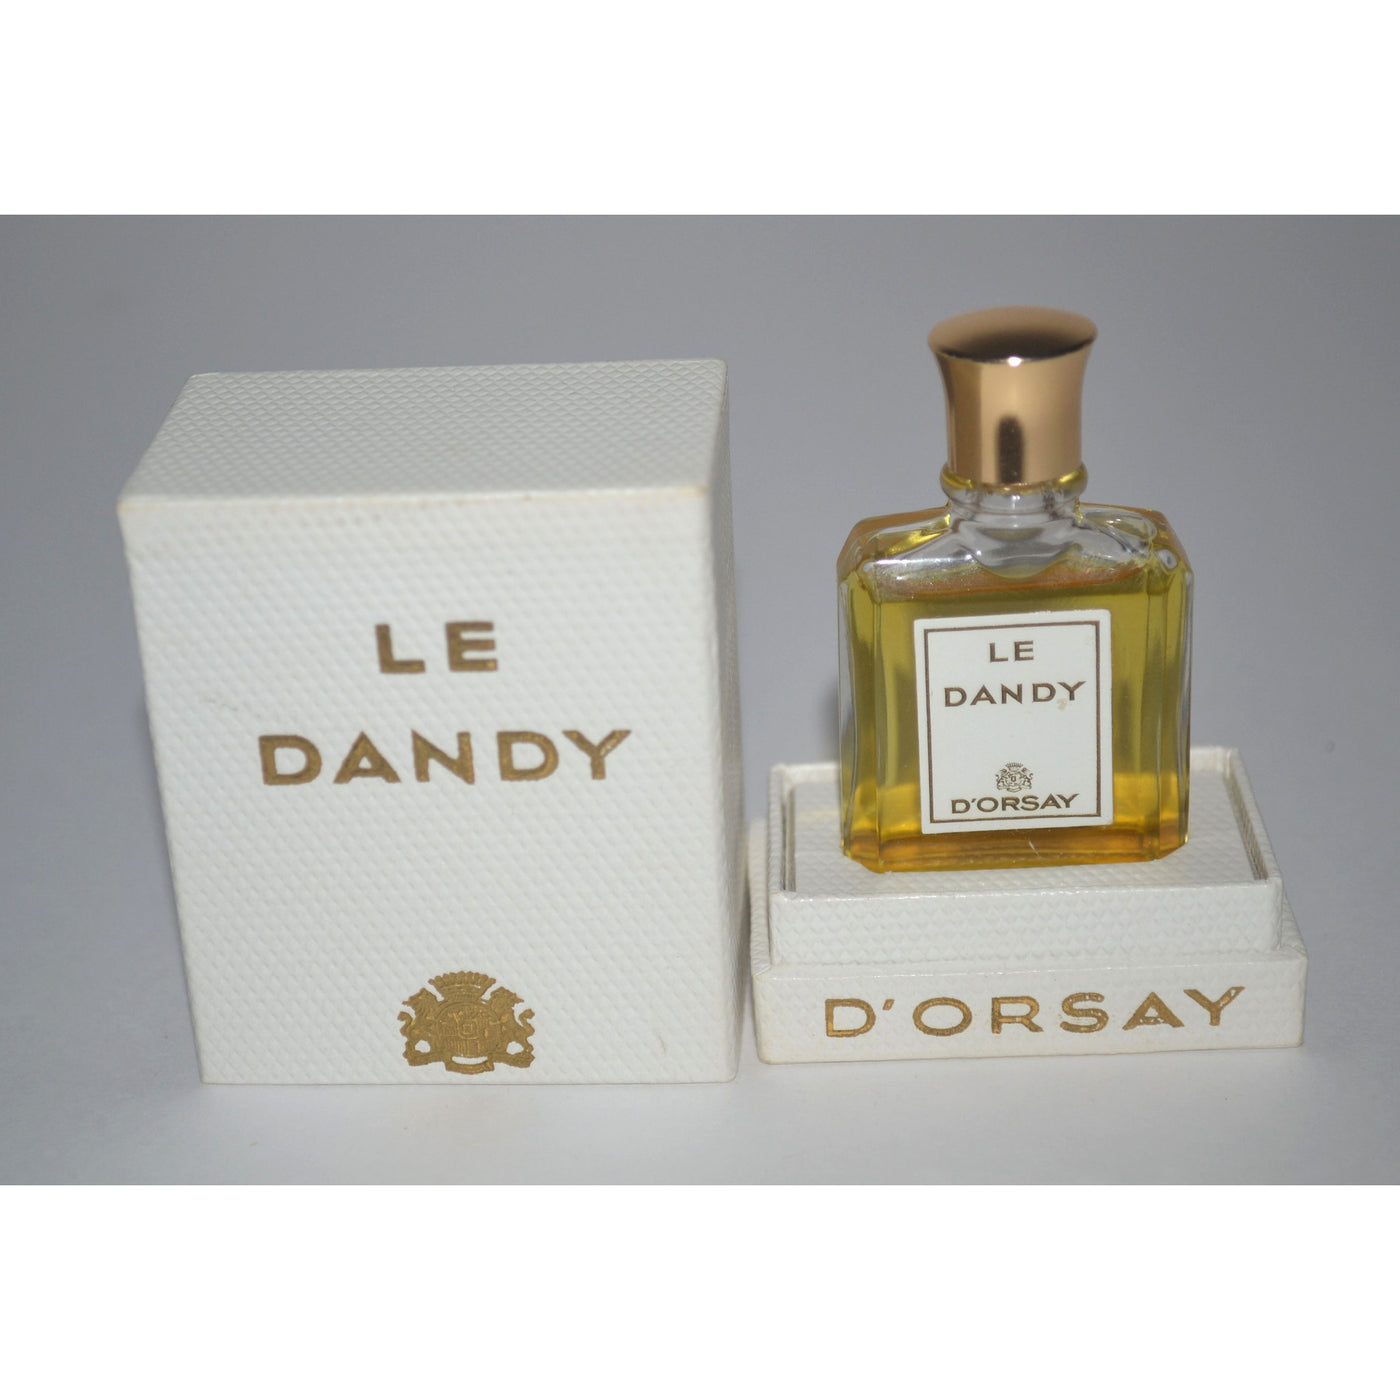 Vintage Le Dandy Perfume By D'Orsay